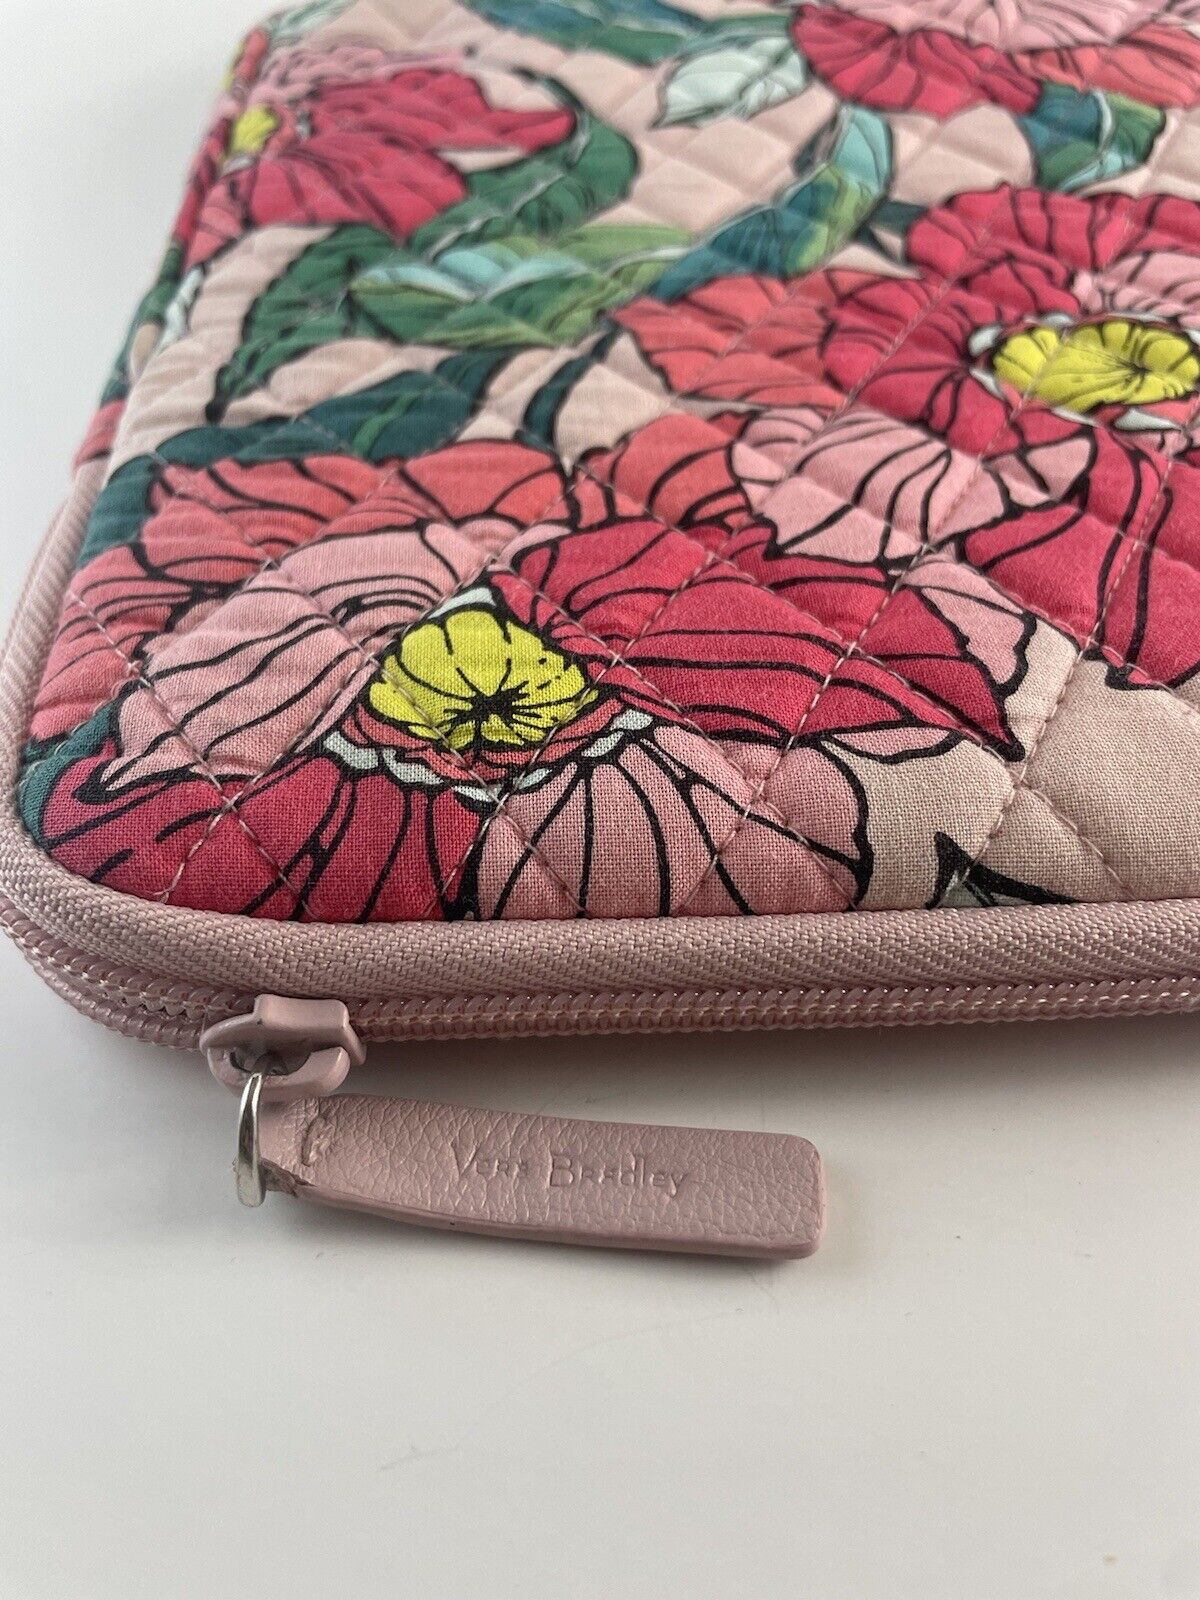 Vera Bradley Quilted Padded Laptop Case Sleeve Paradise Floral Pink 12